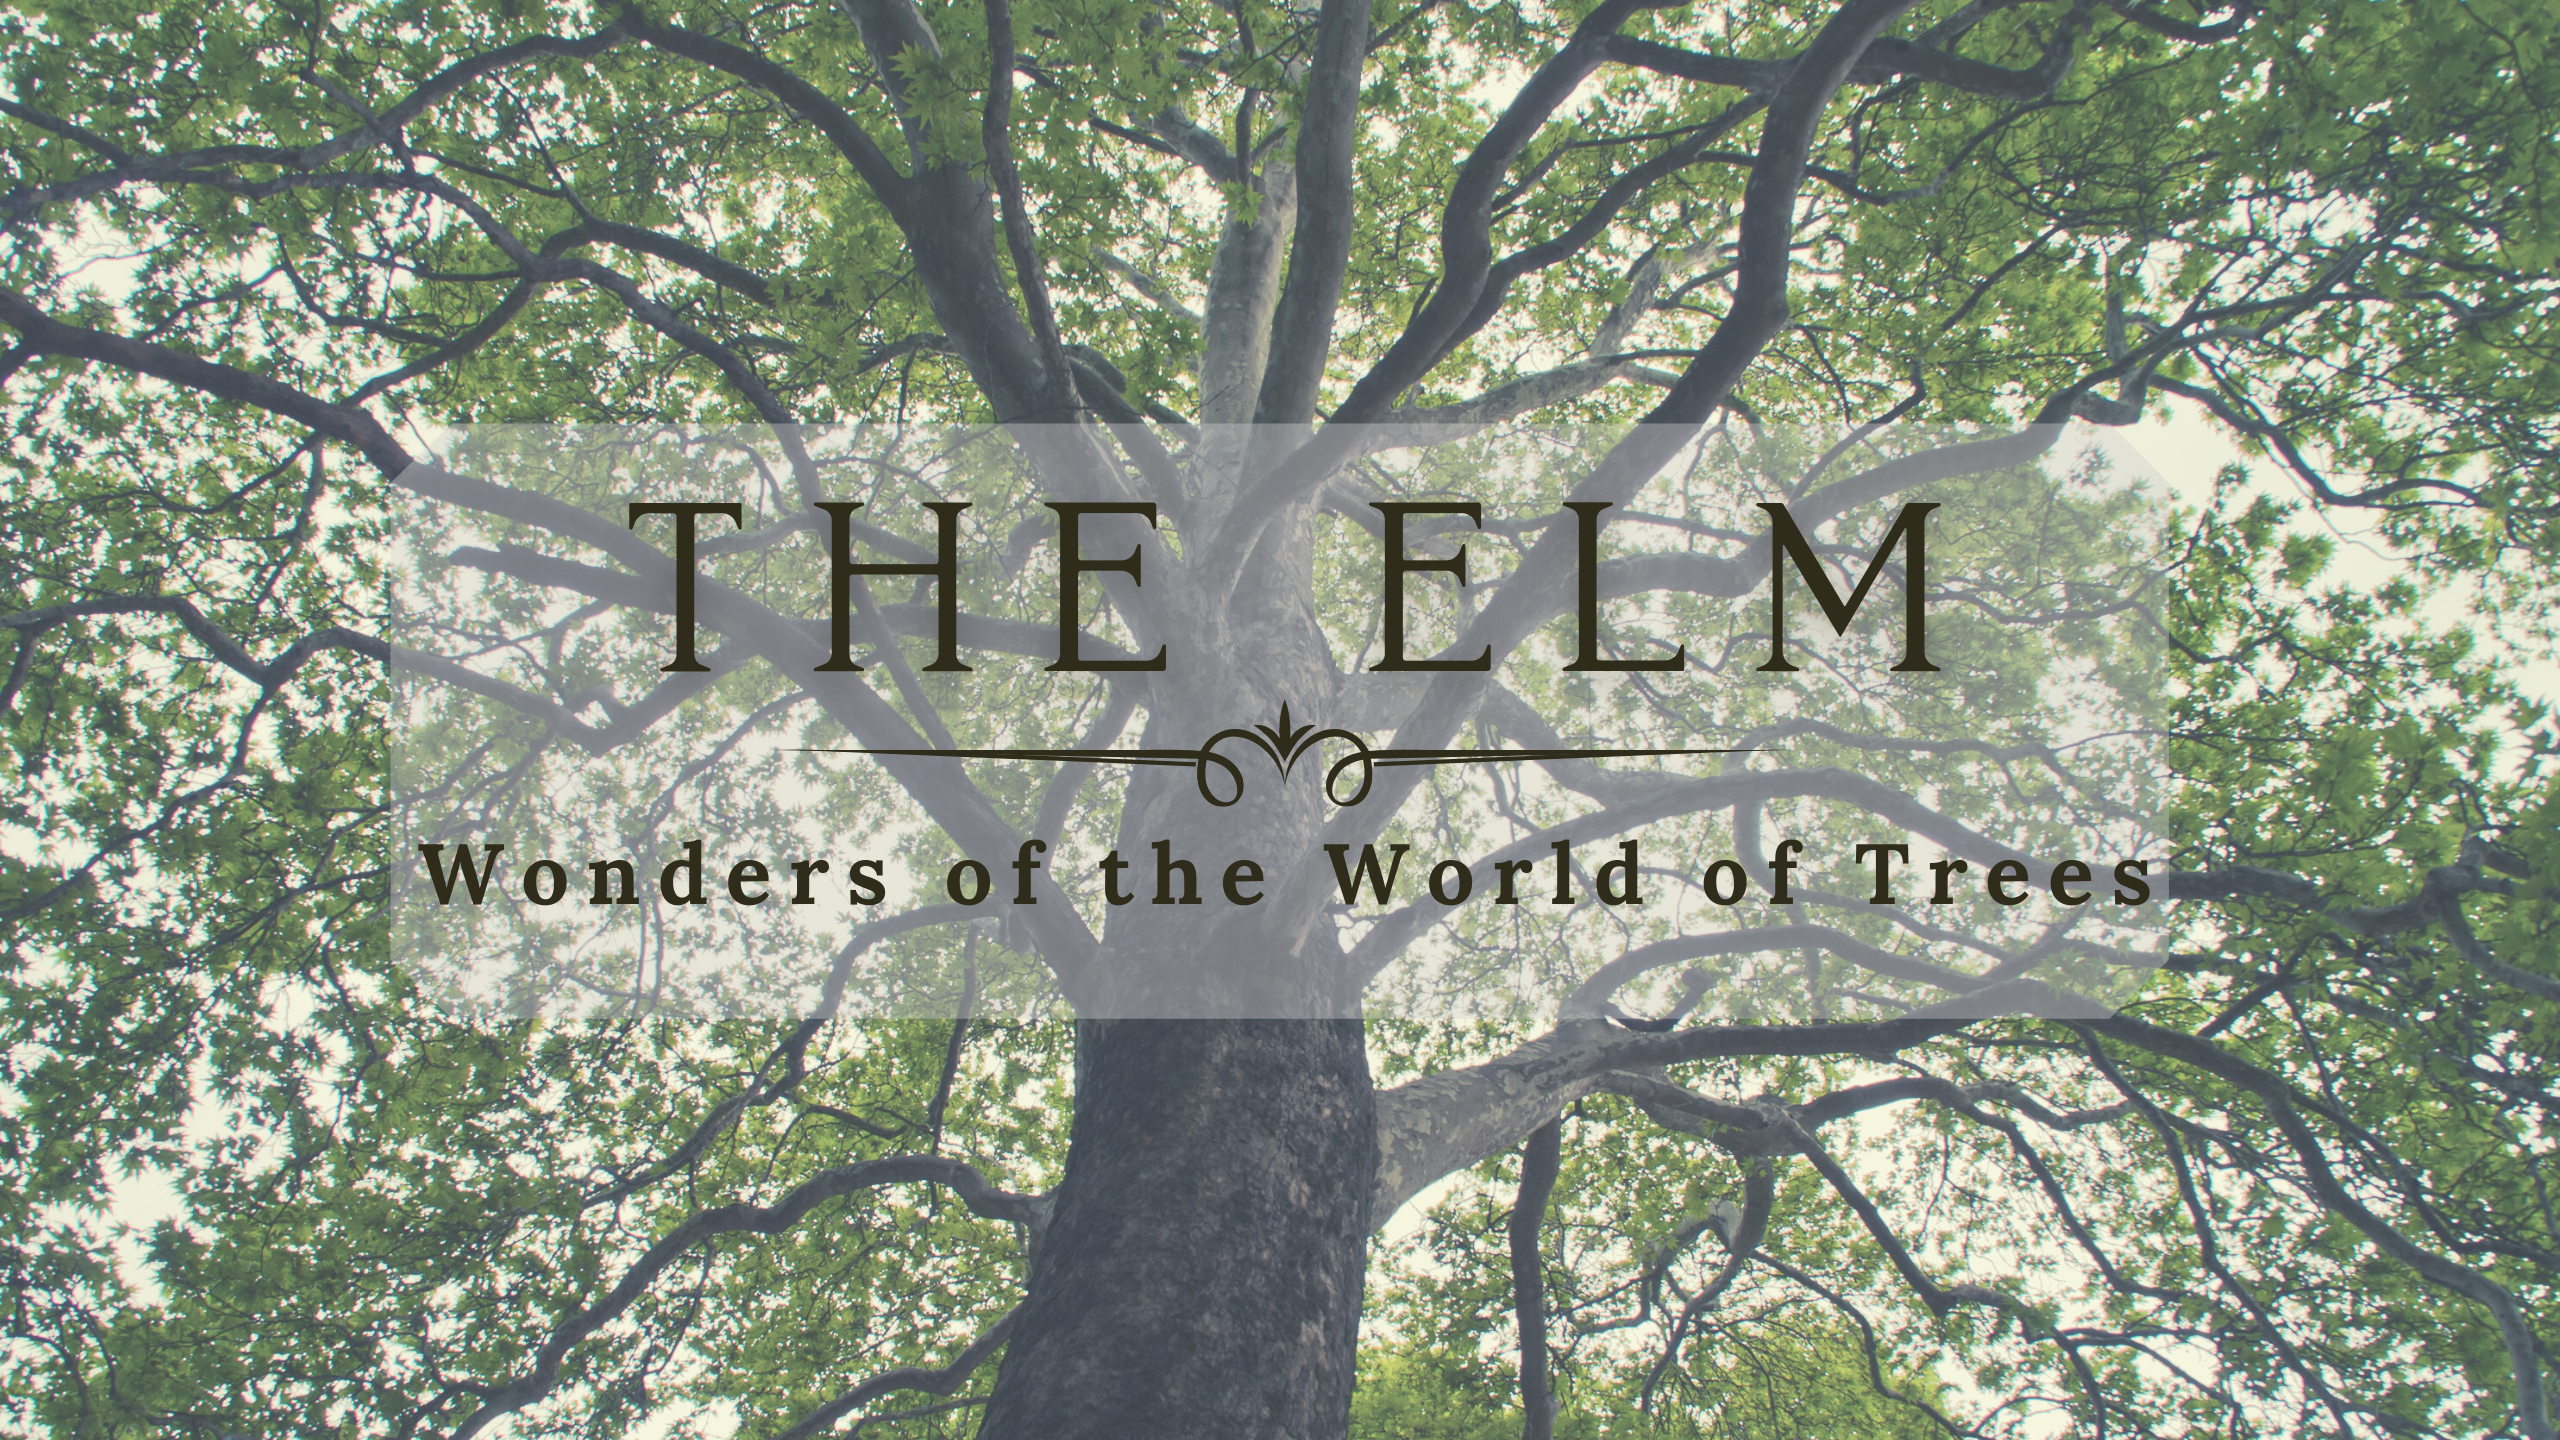 picture of an elm tree with the words "The Elm: Wonders of the World of Trees" in front